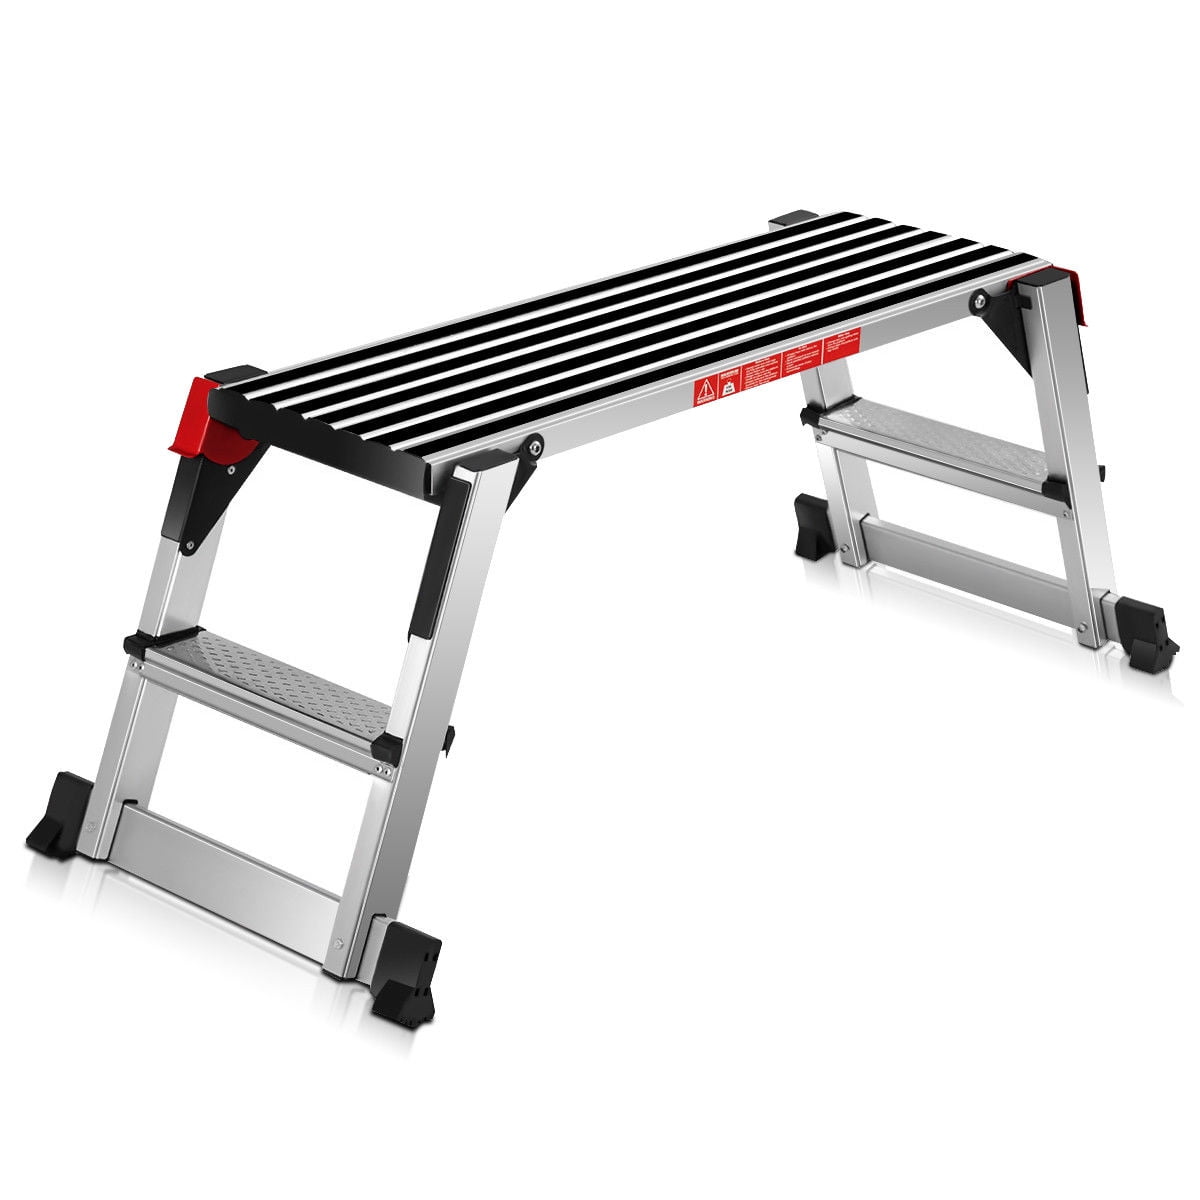 Step Ladder Step Stool Fold Out Work Platform Tool/paint Tray 